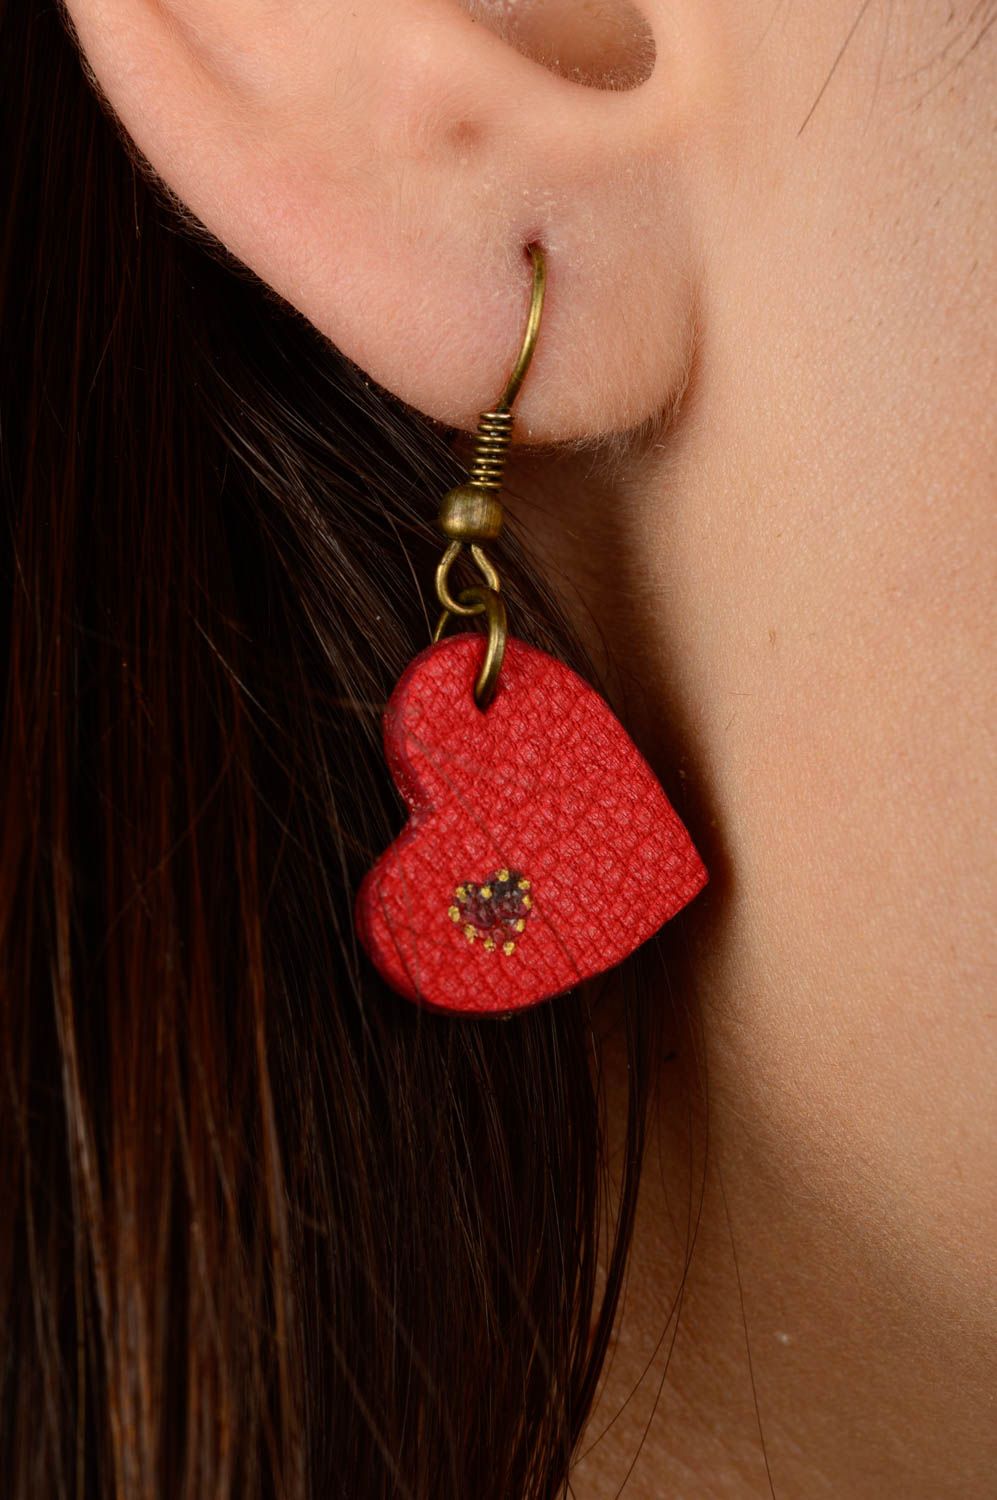 Handmade earrings designer jewelry leather goods dangling earrings gifts for her photo 2